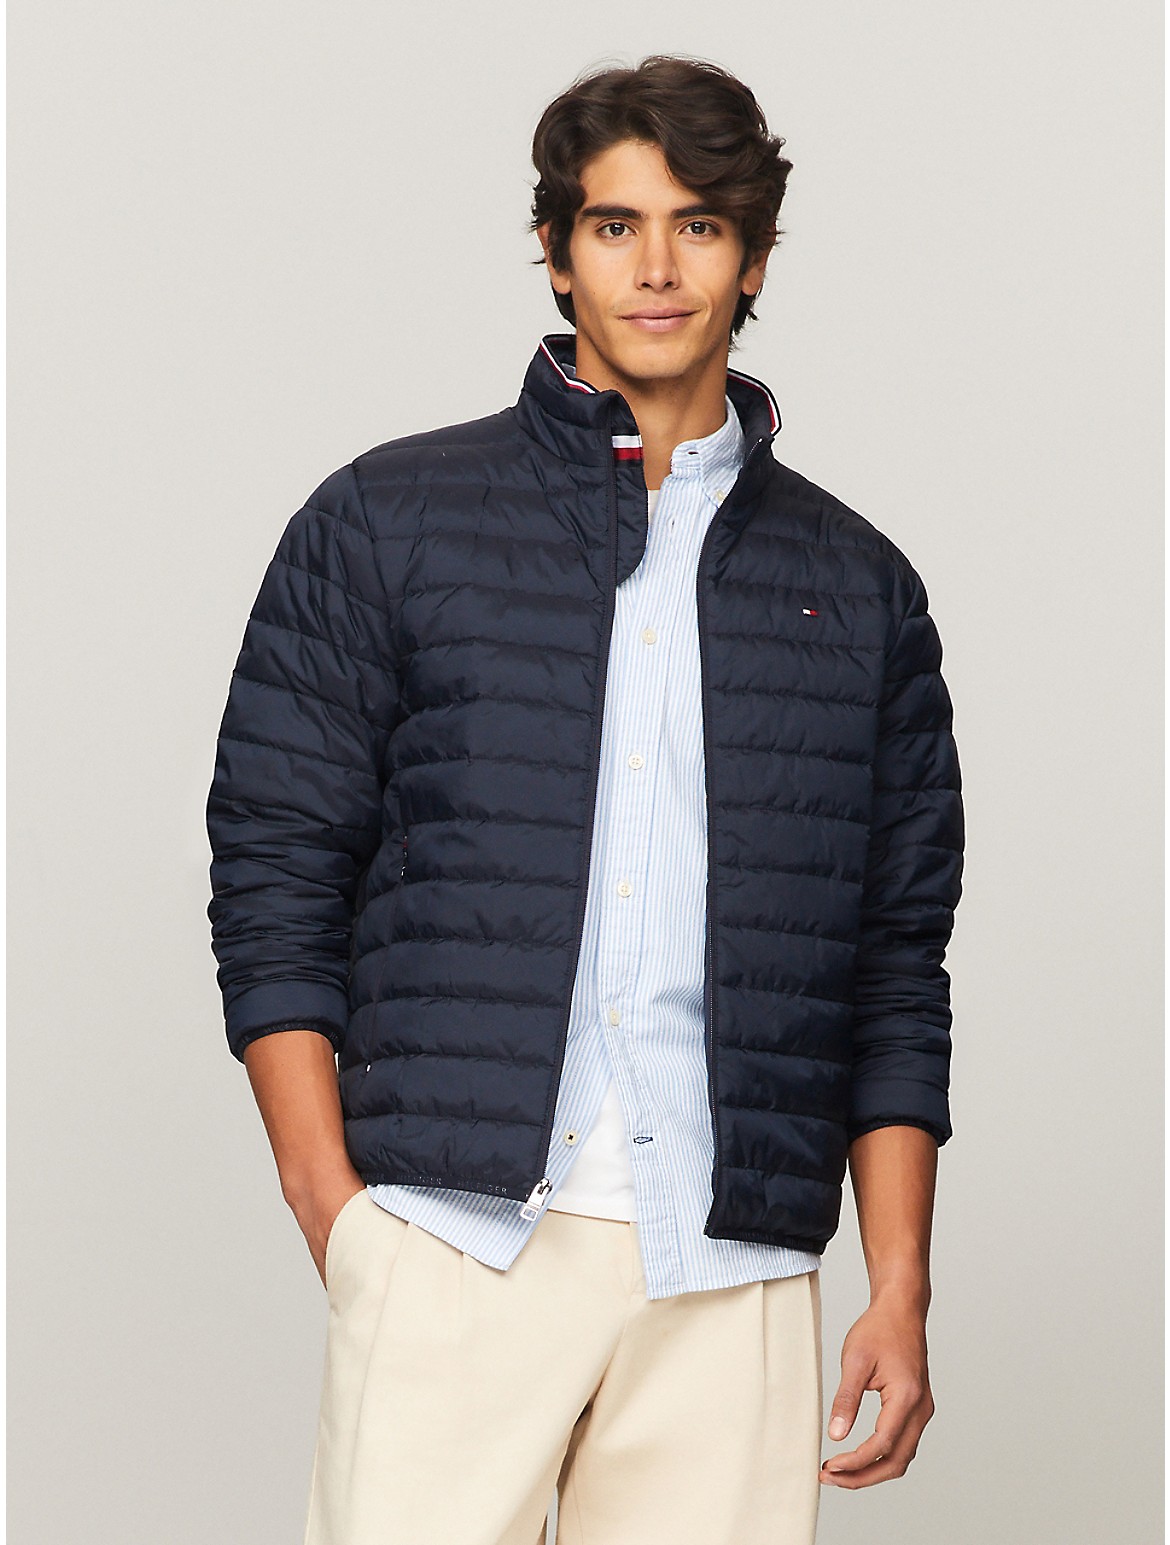 Tommy Hilfiger Recycled In | Sky ModeSens Desert Packable Jacket